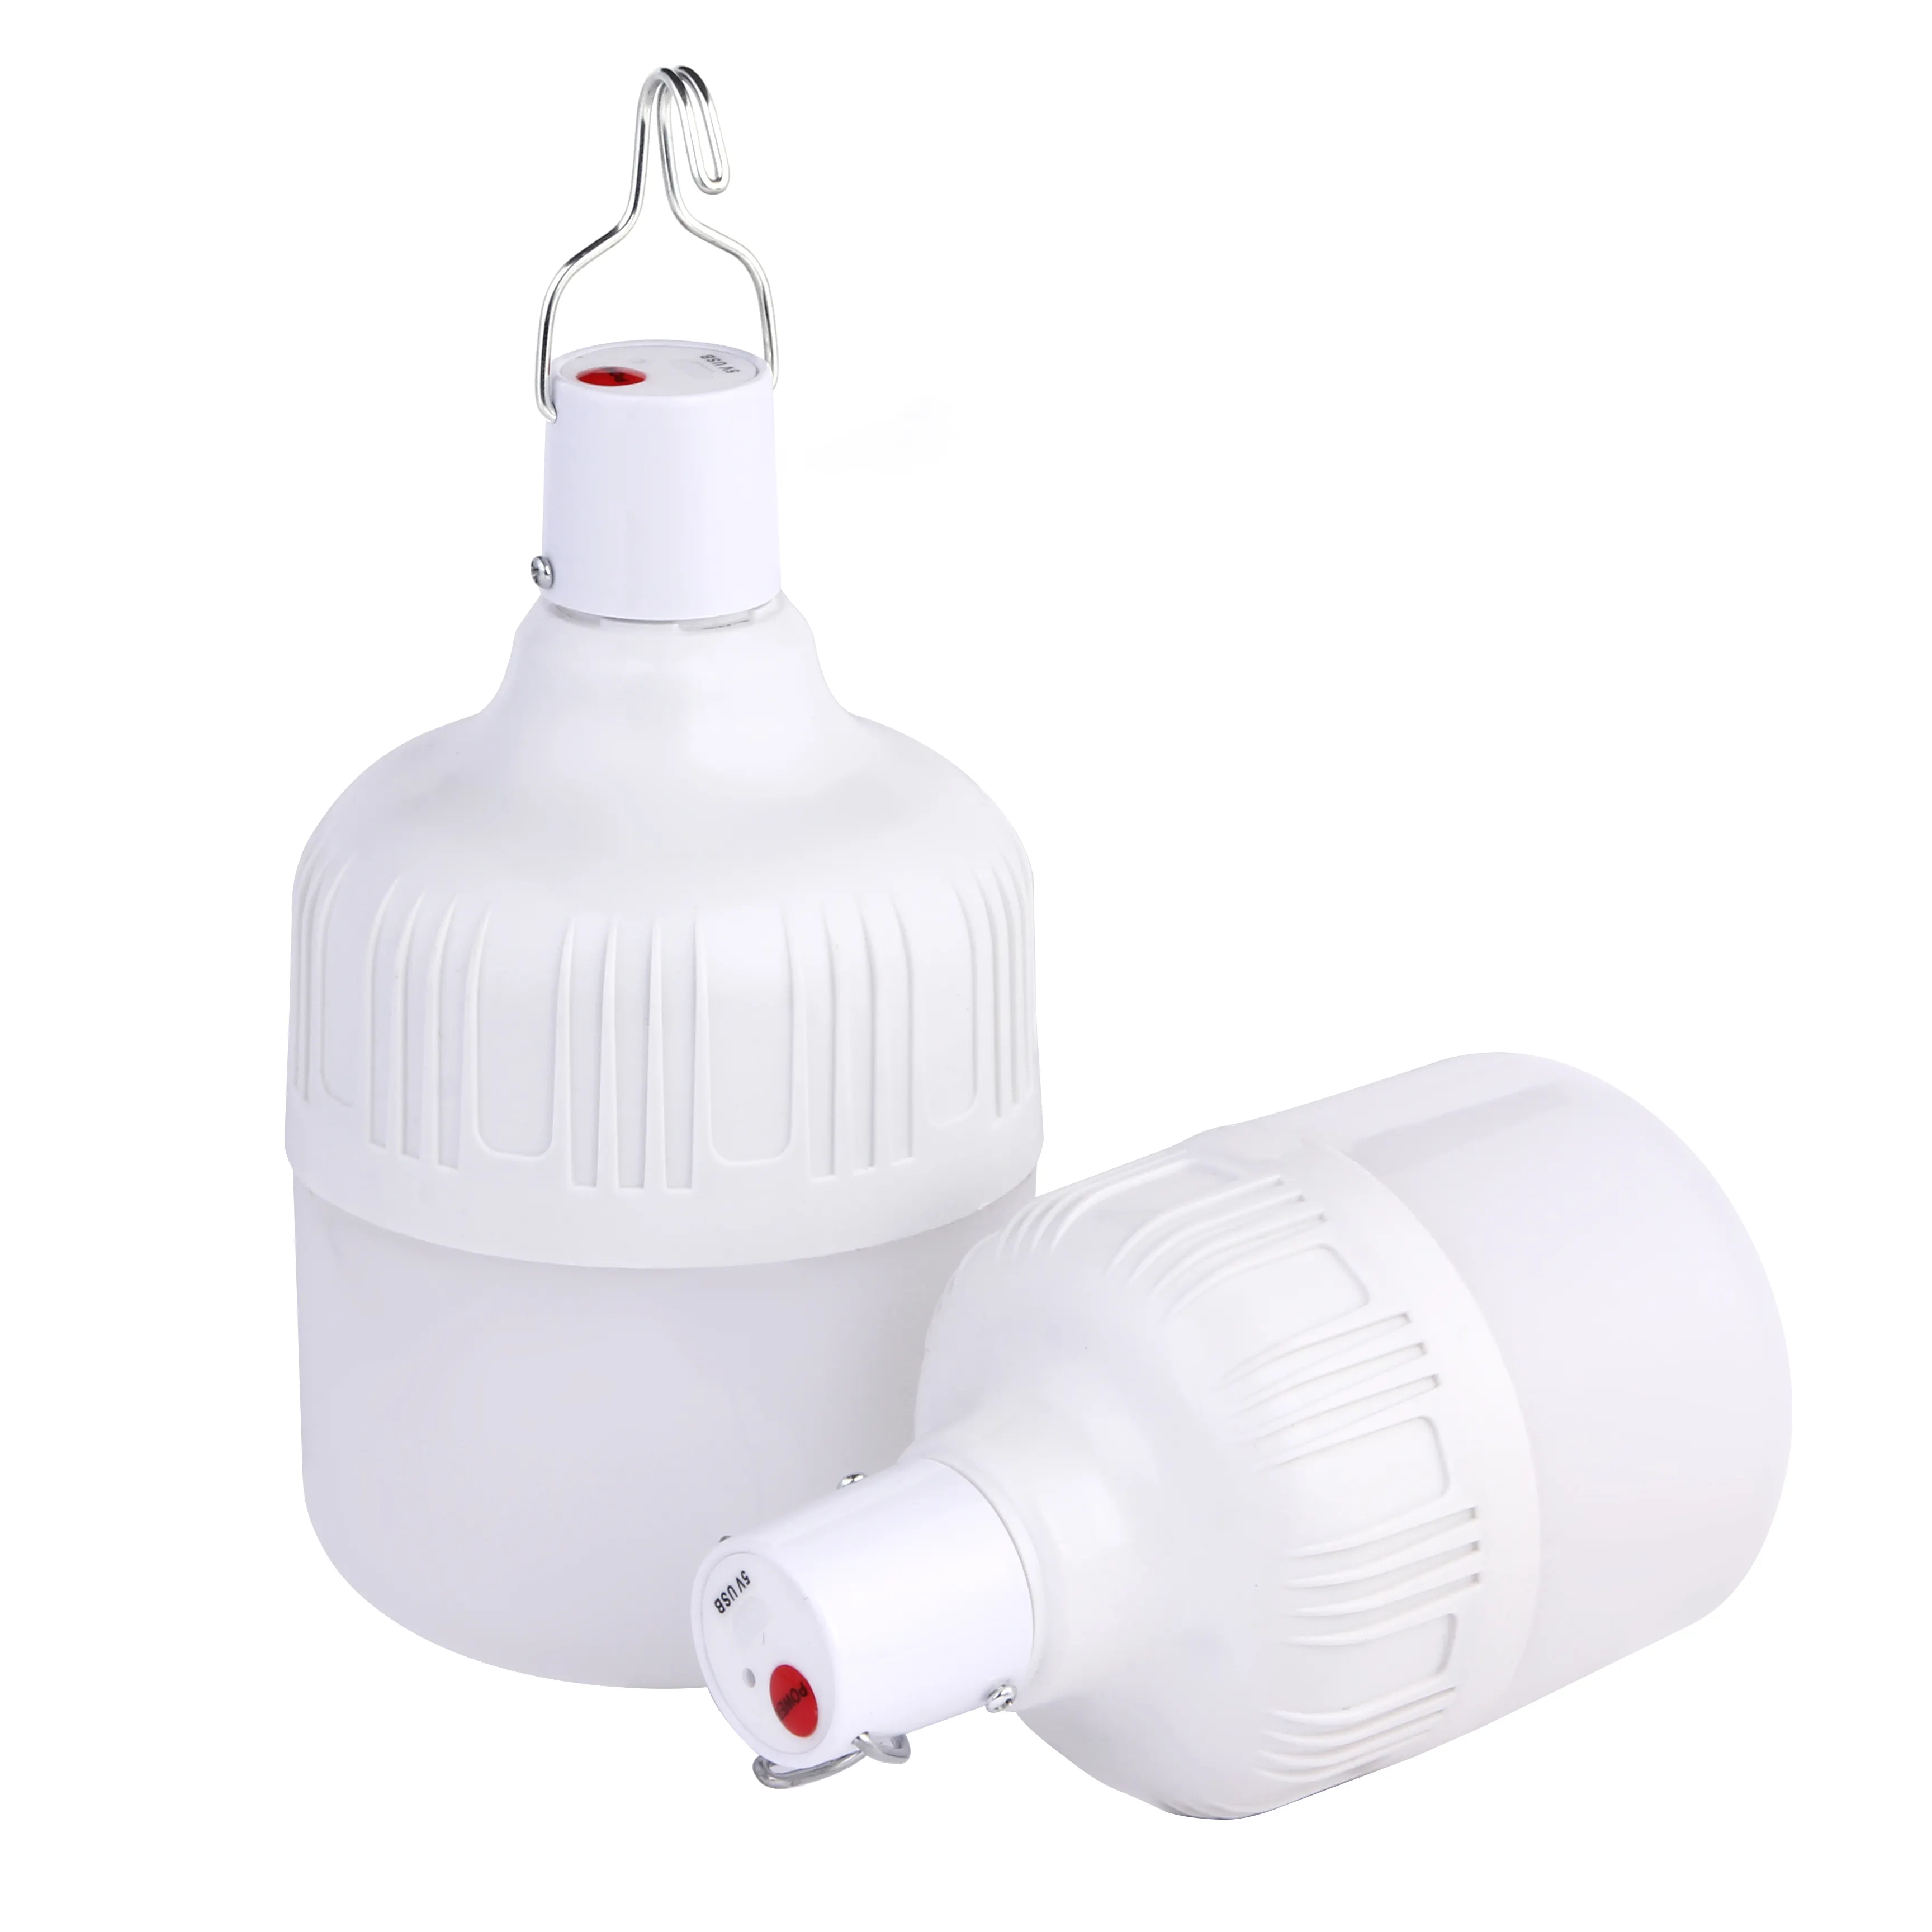 Portable B22 E27 30w Daylight Rechargeable Lamp 4 Hour Emergency Lights Emergency Light With Battery